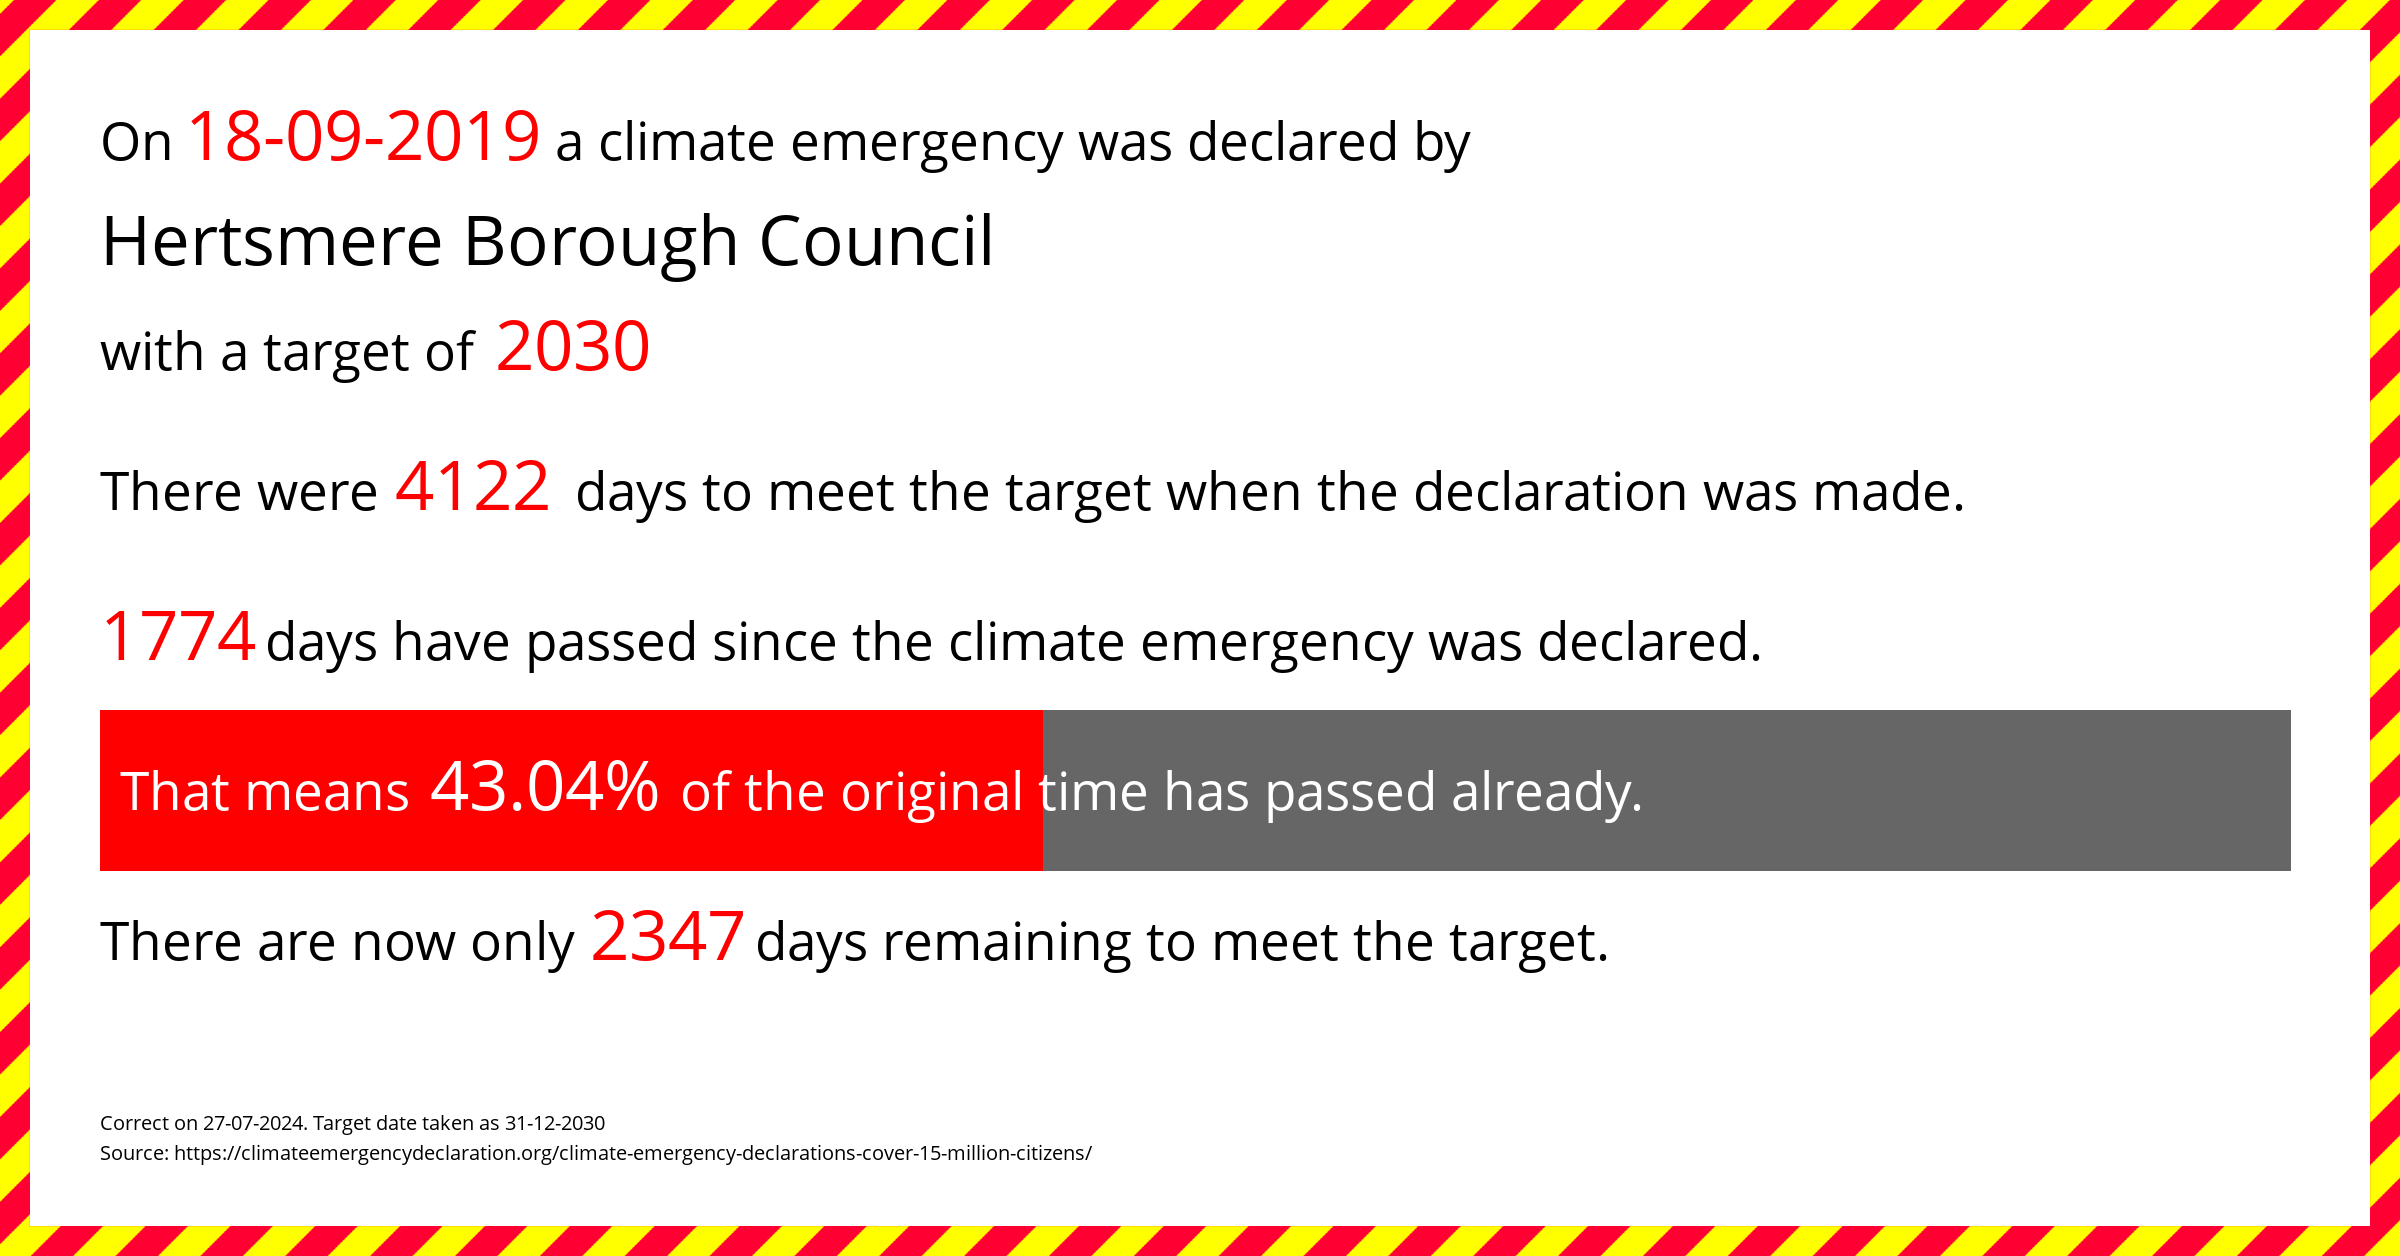 Hertsmere Borough Council declared a Climate emergency on Wednesday 18th September 2019, with a target of 2030.